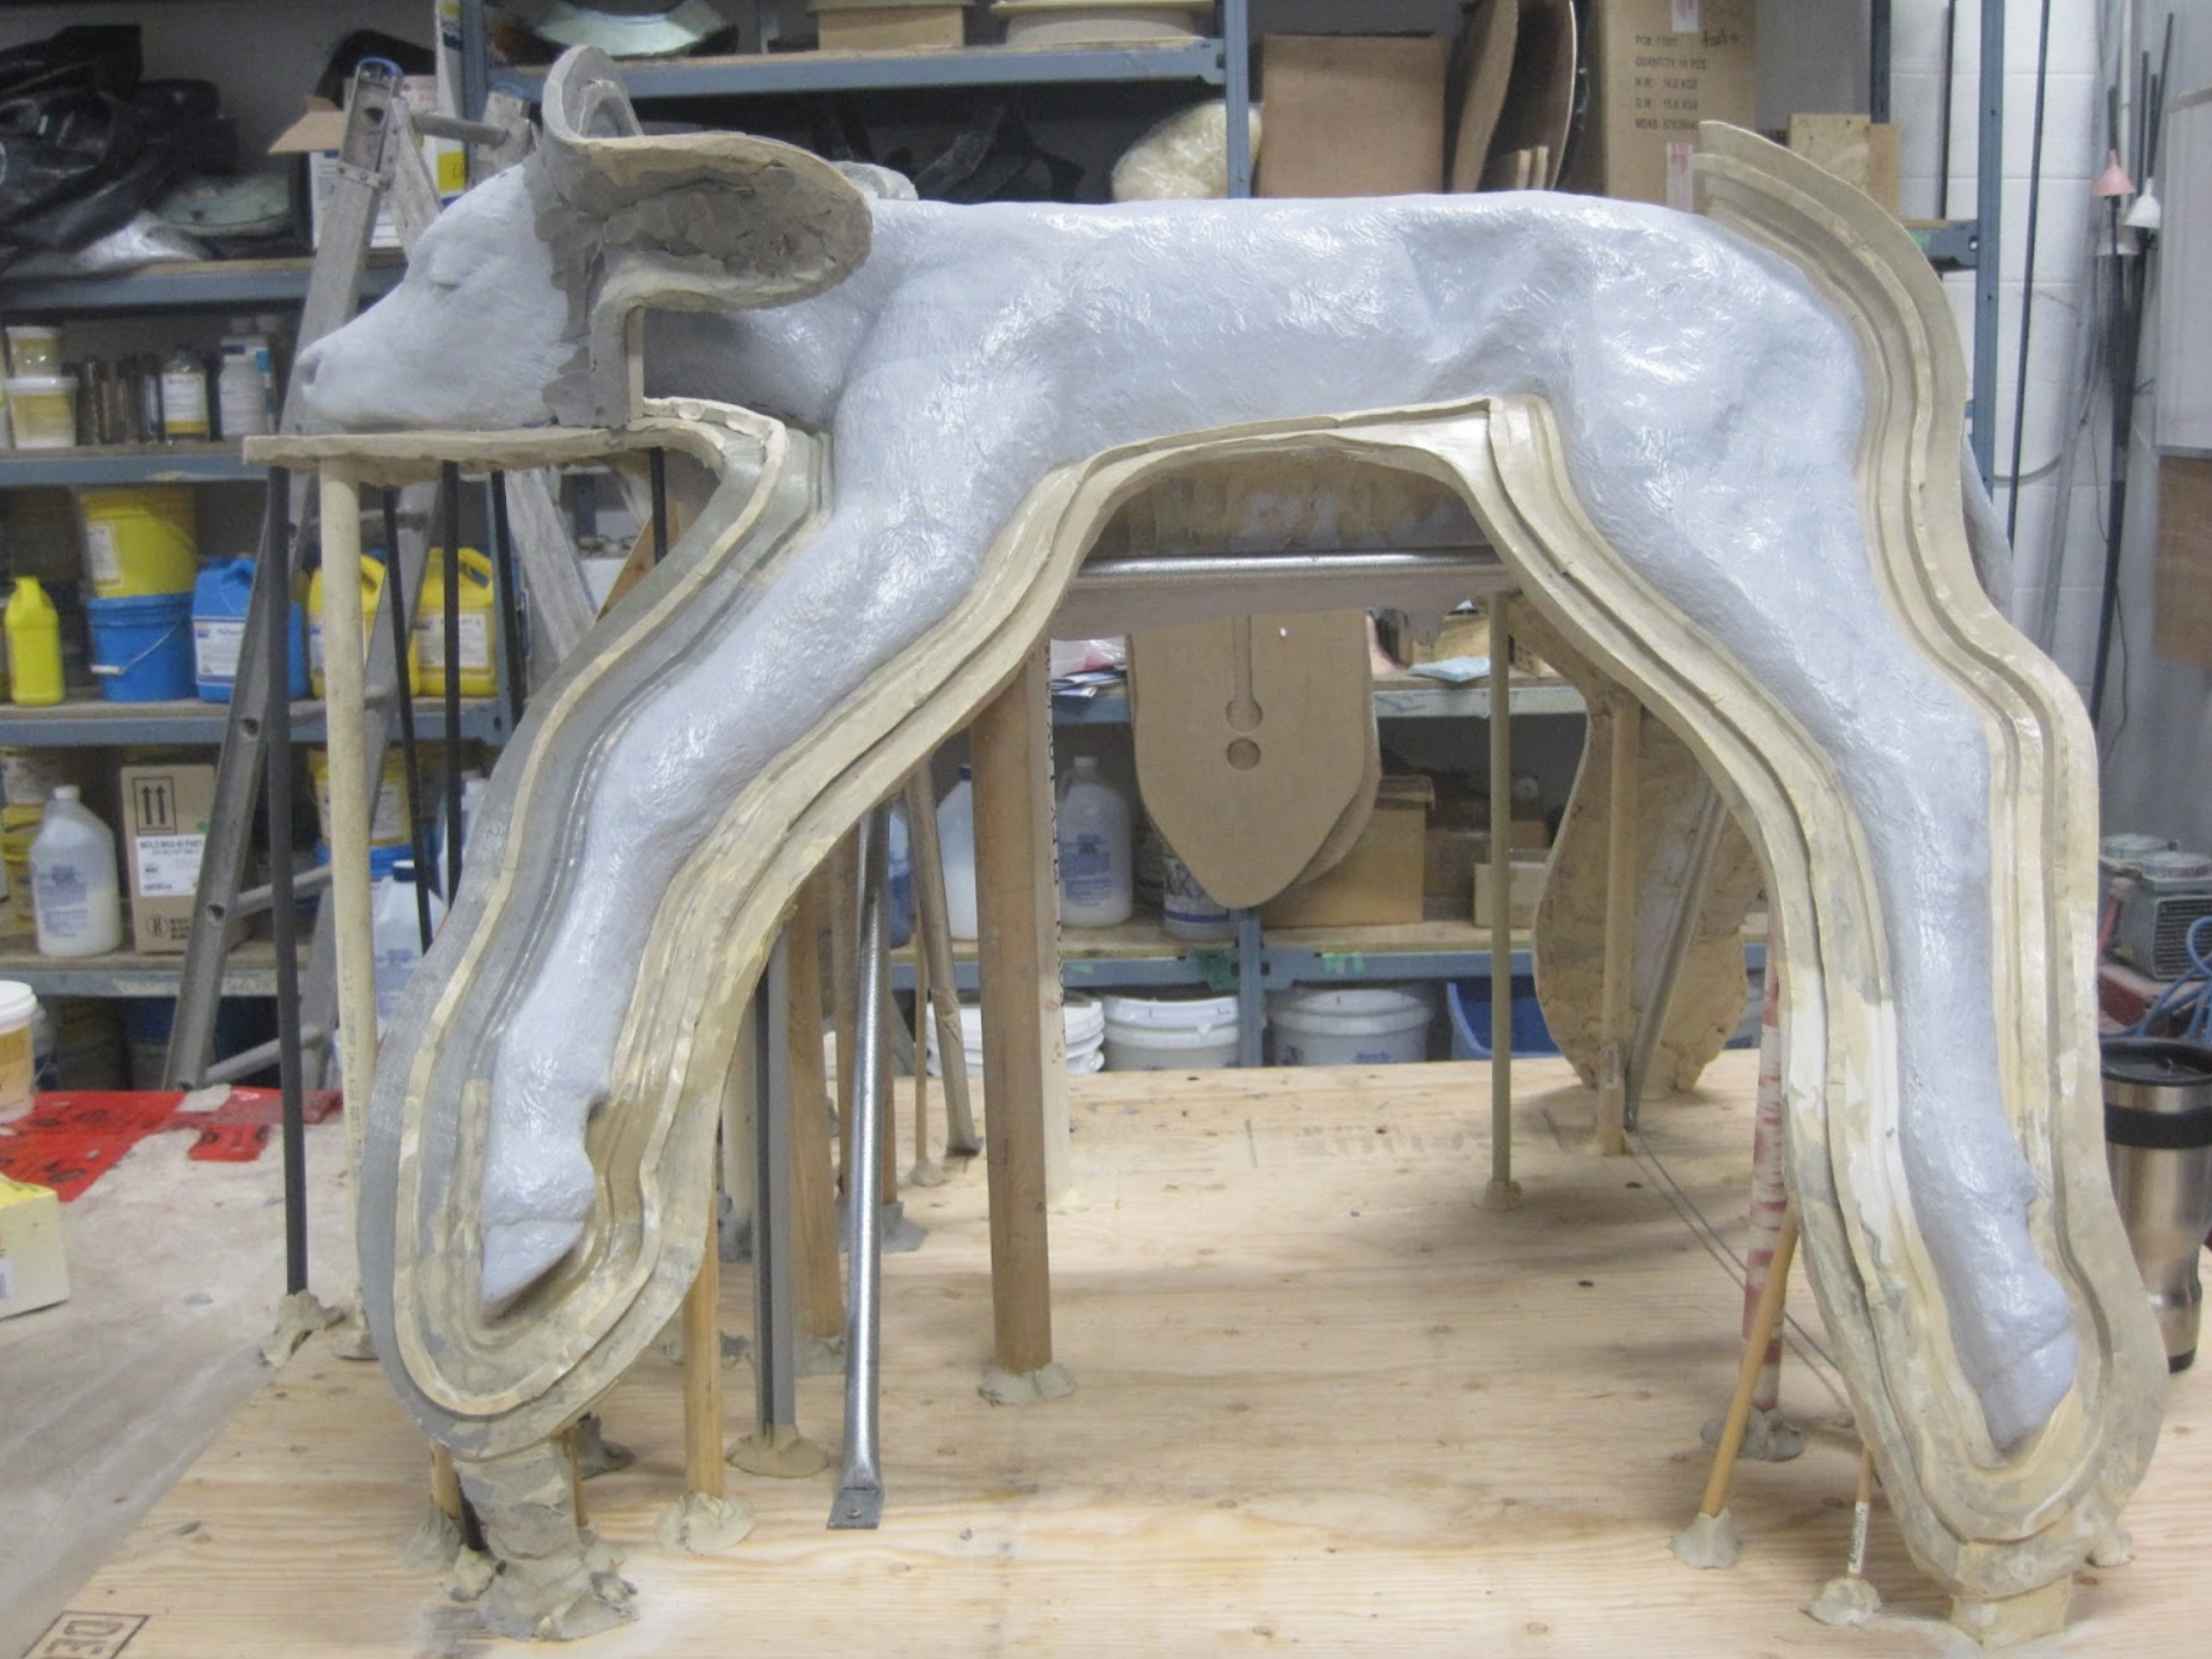  Here the dystocia calf model is being prepared to create a new mold. Improvements are being made during this process that will improve the quality of the finished product. 